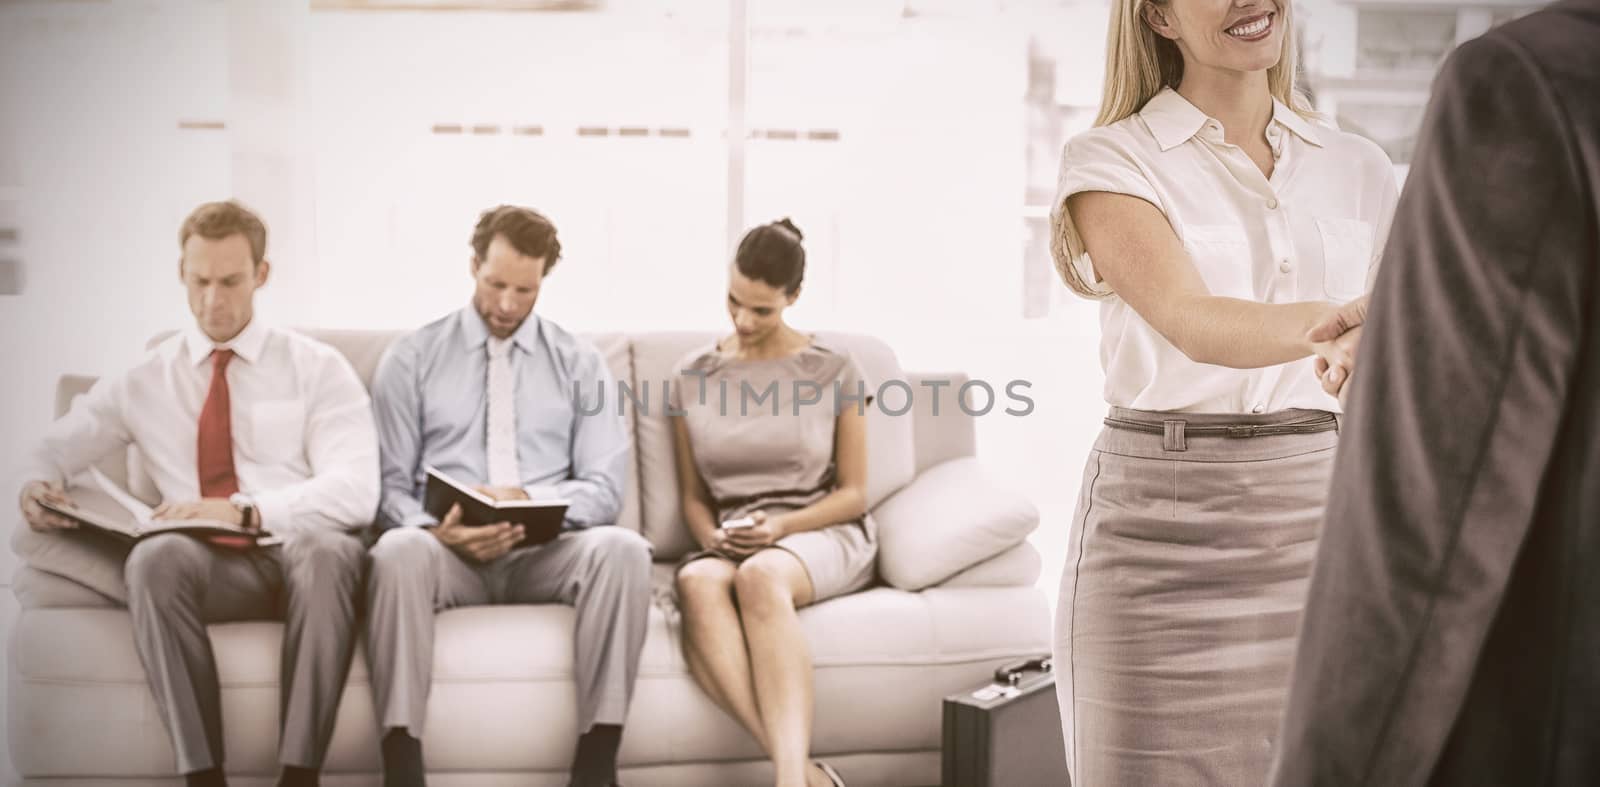 Businessman shaking hands with woman besides people waiting for interview by Wavebreakmedia